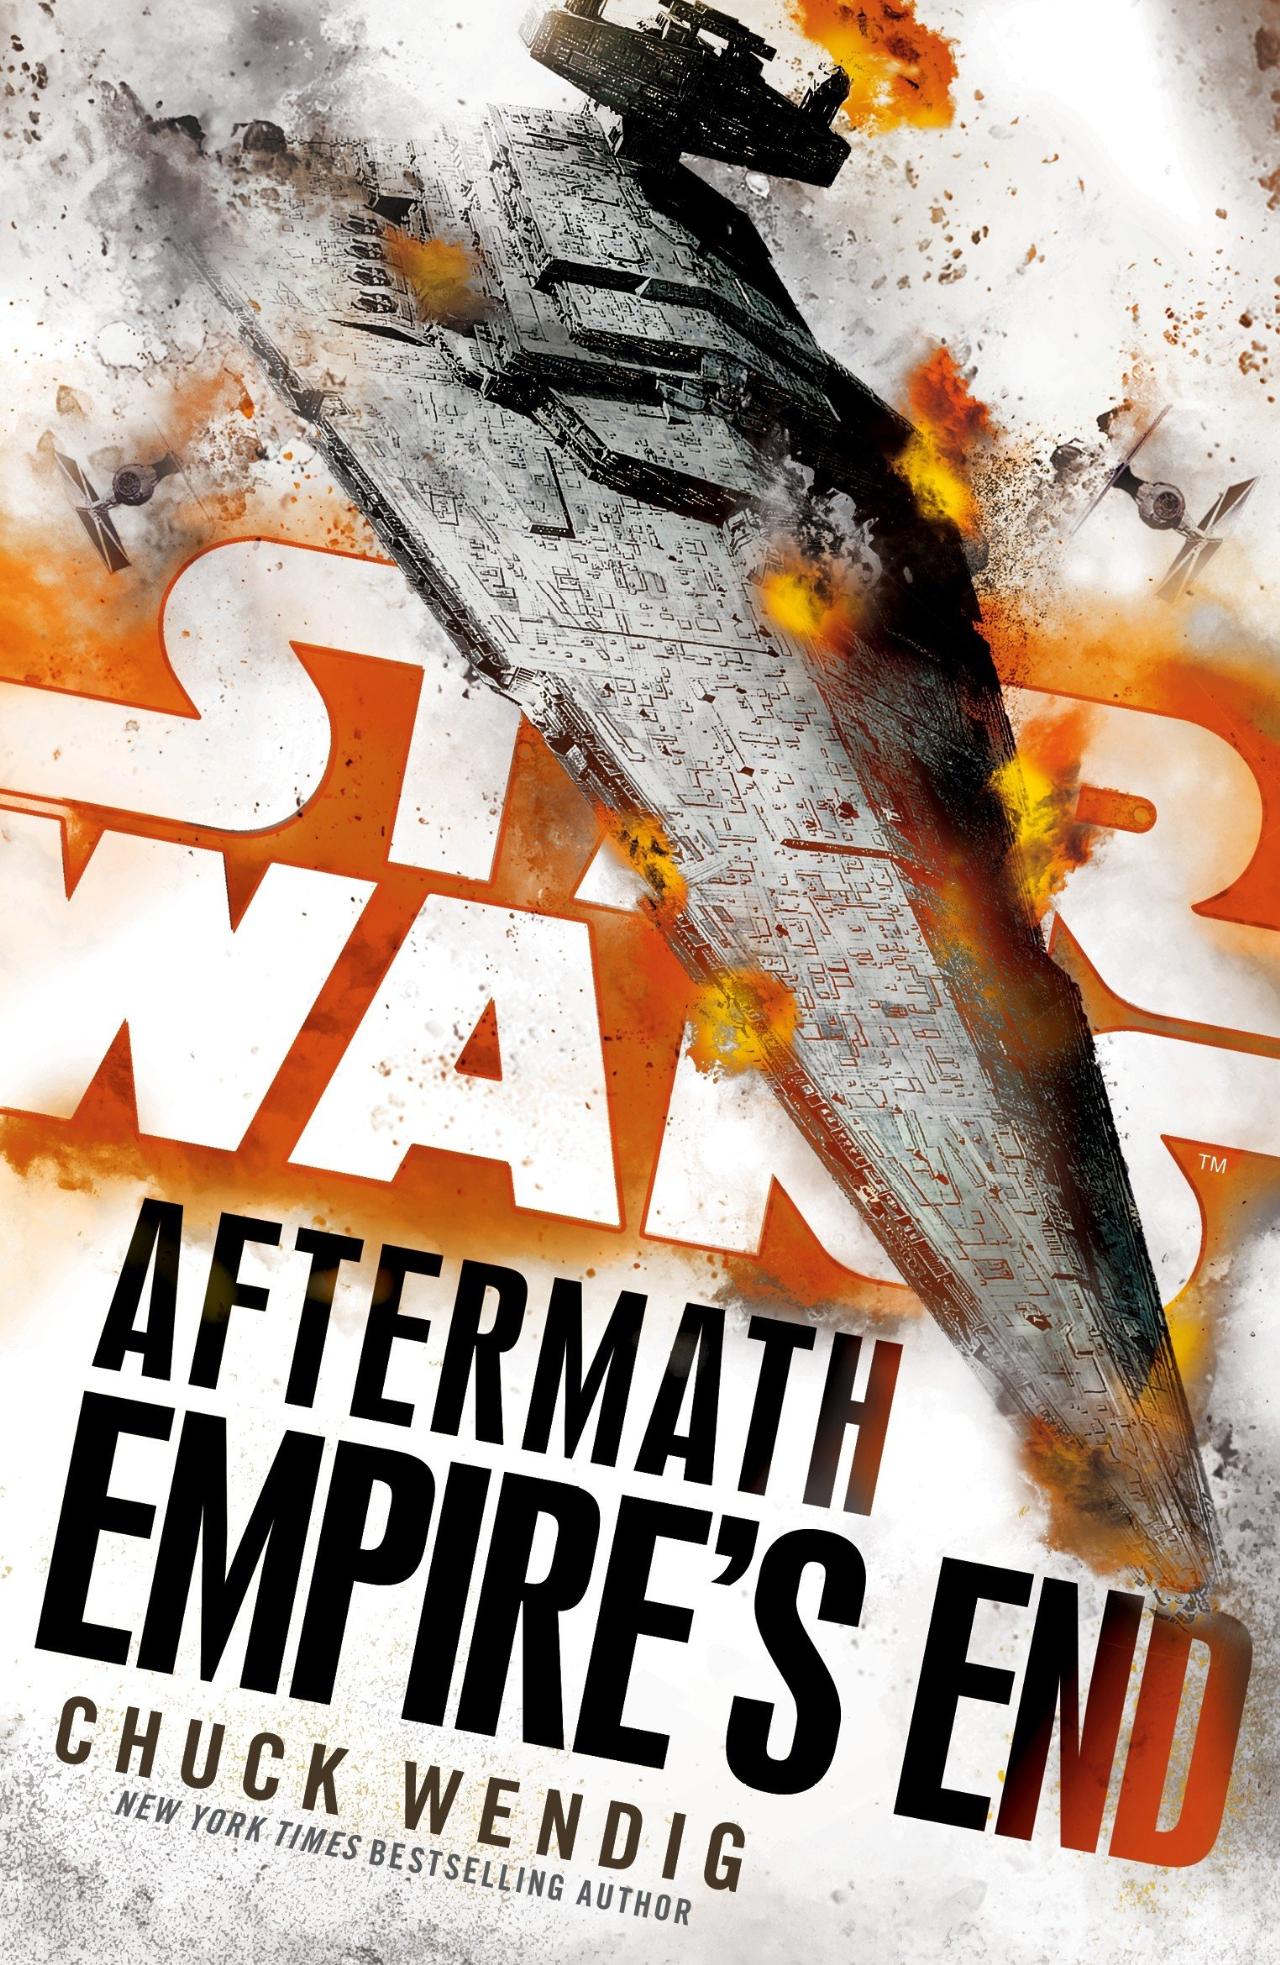 Book Cover for Star Wars: Aftermath: Empire's End